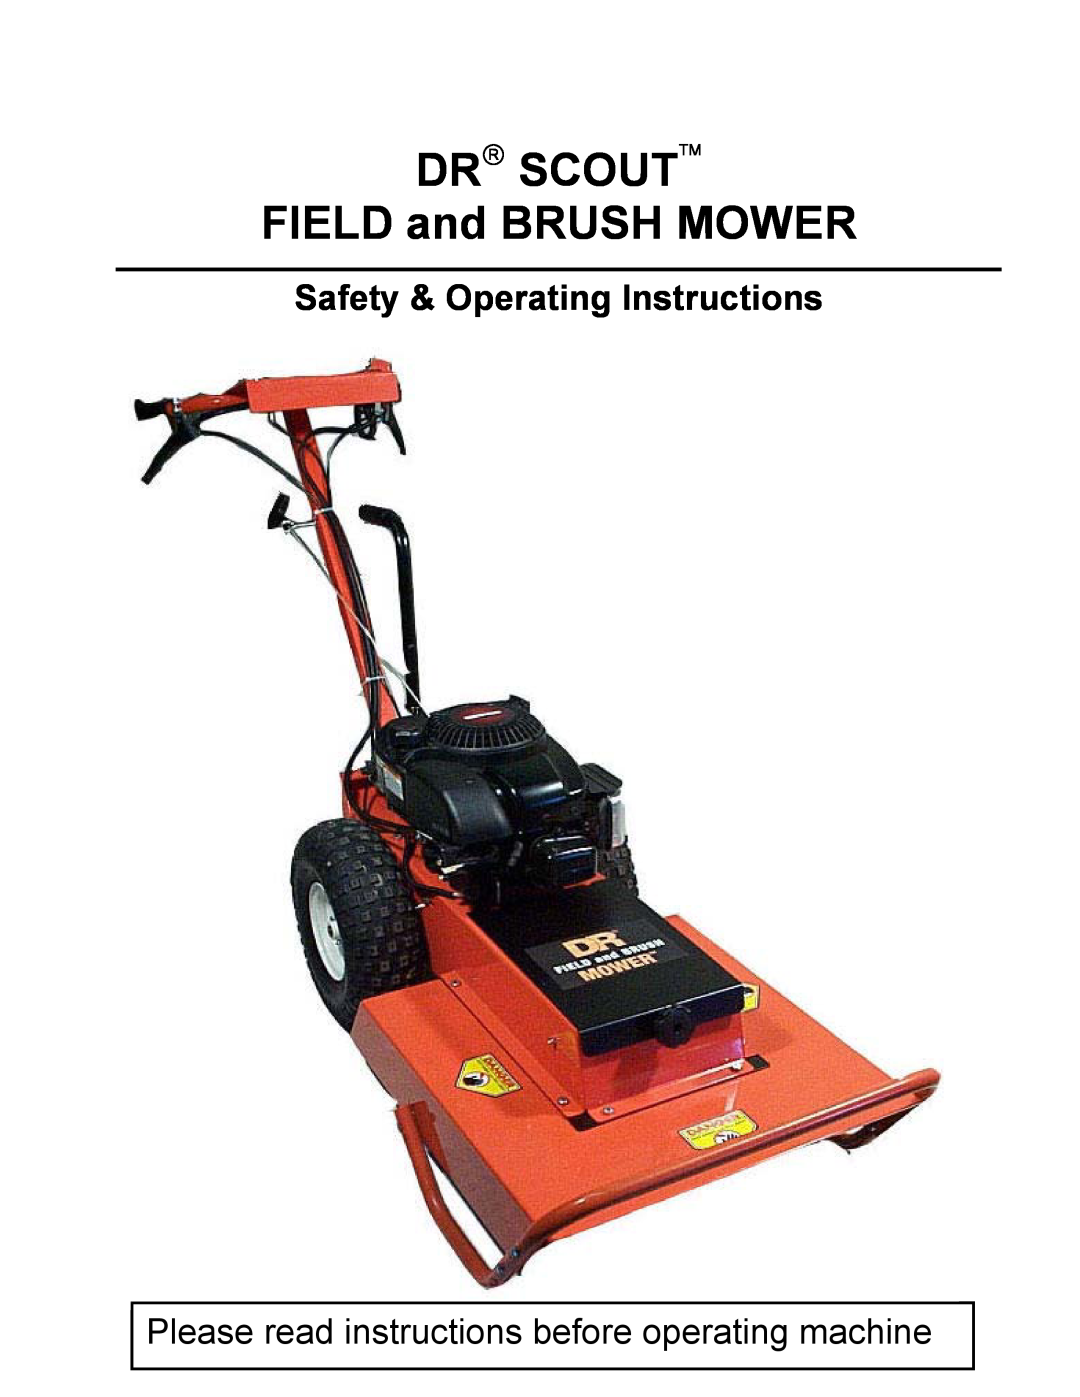 Country Home Products DR SCOUT FIELD and BRUSH MOWER manual DR SCOUT FIELD and BRUSH MOWER 